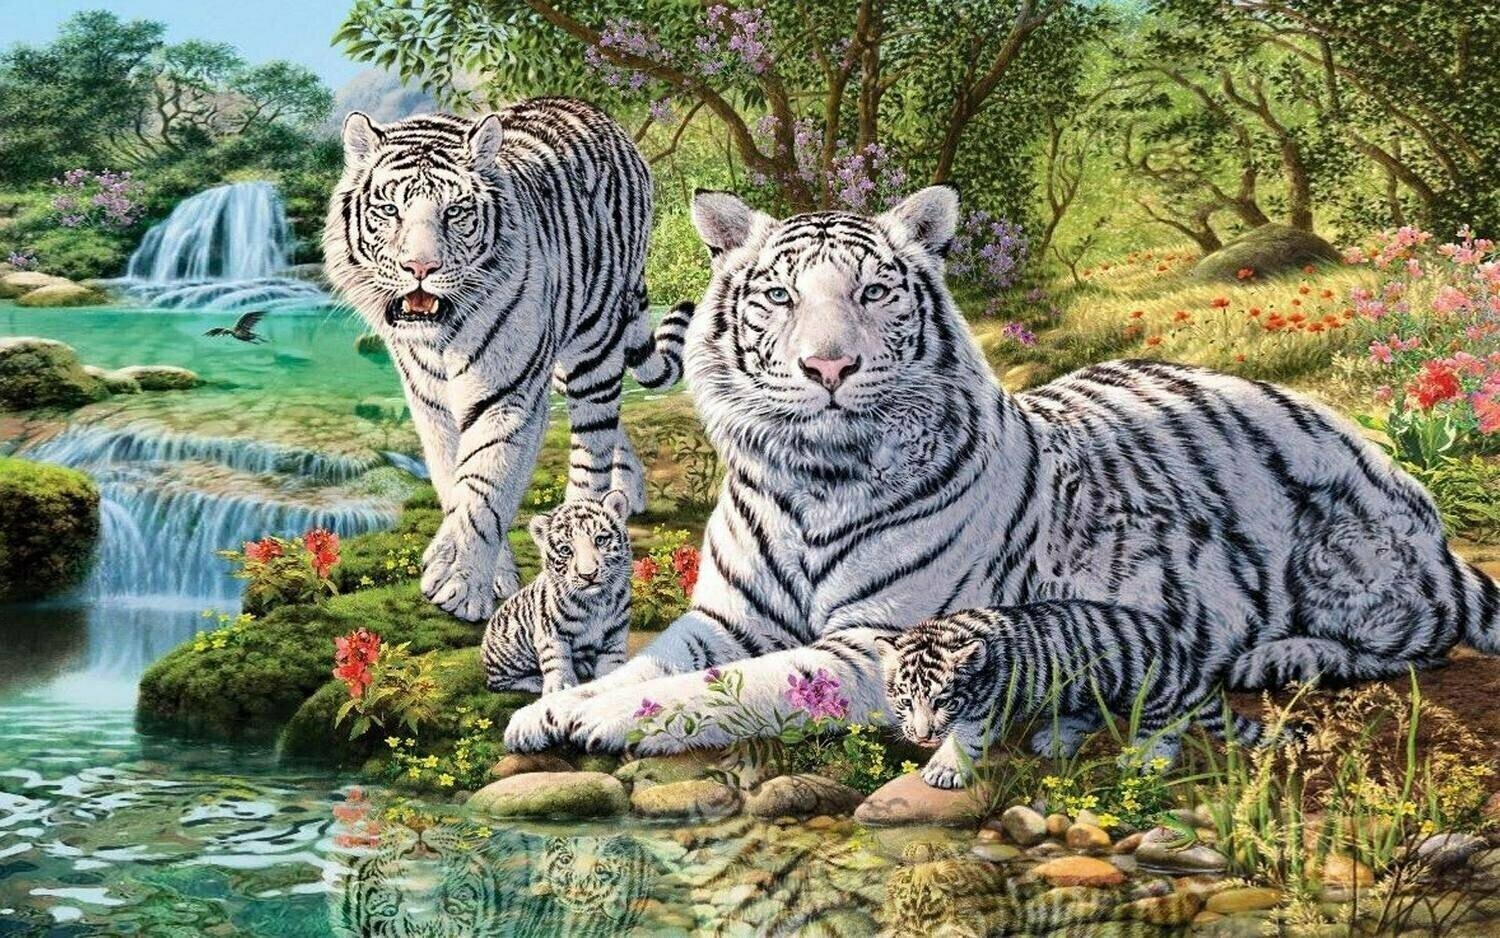 White Tiger Family - Specially ordered for you. Delivery is approximately 4 - 6 weeks.